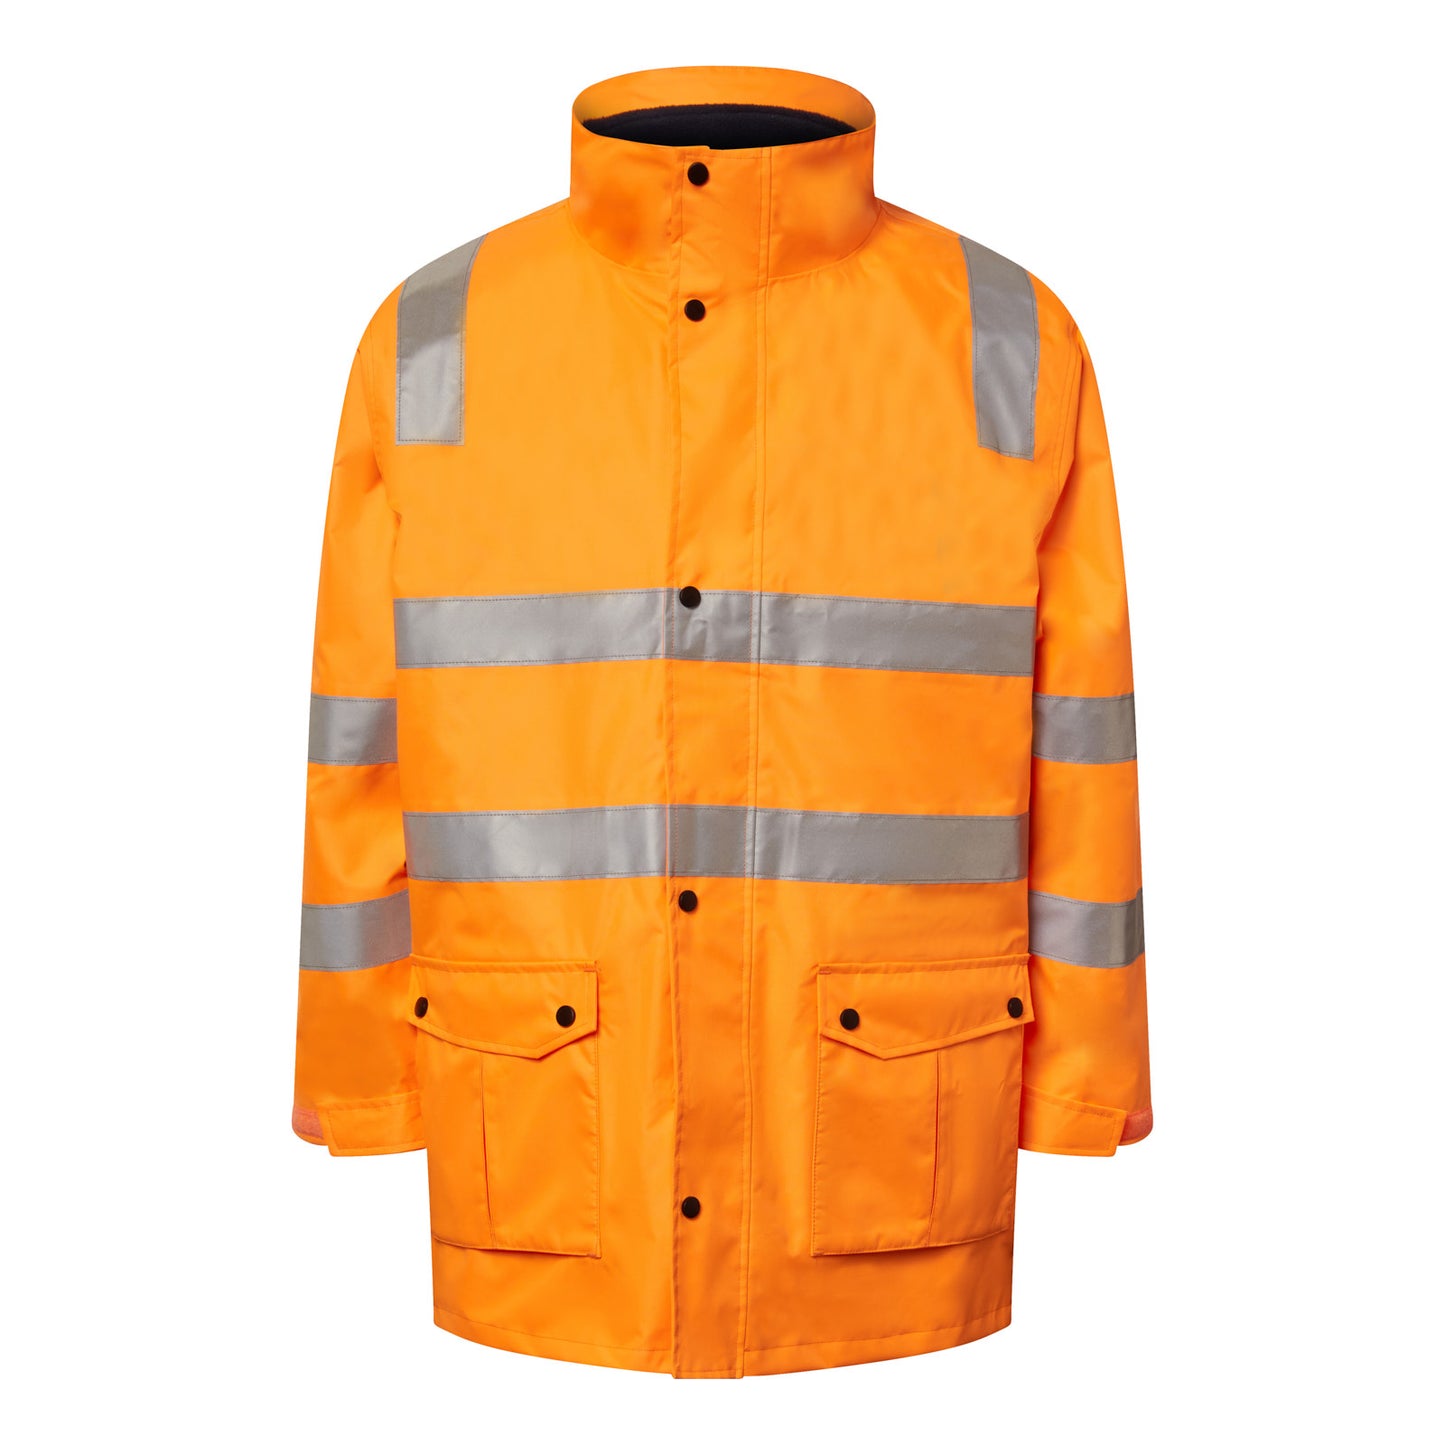 VIC Rail Outer Jacket With Tape - made by Workcraft